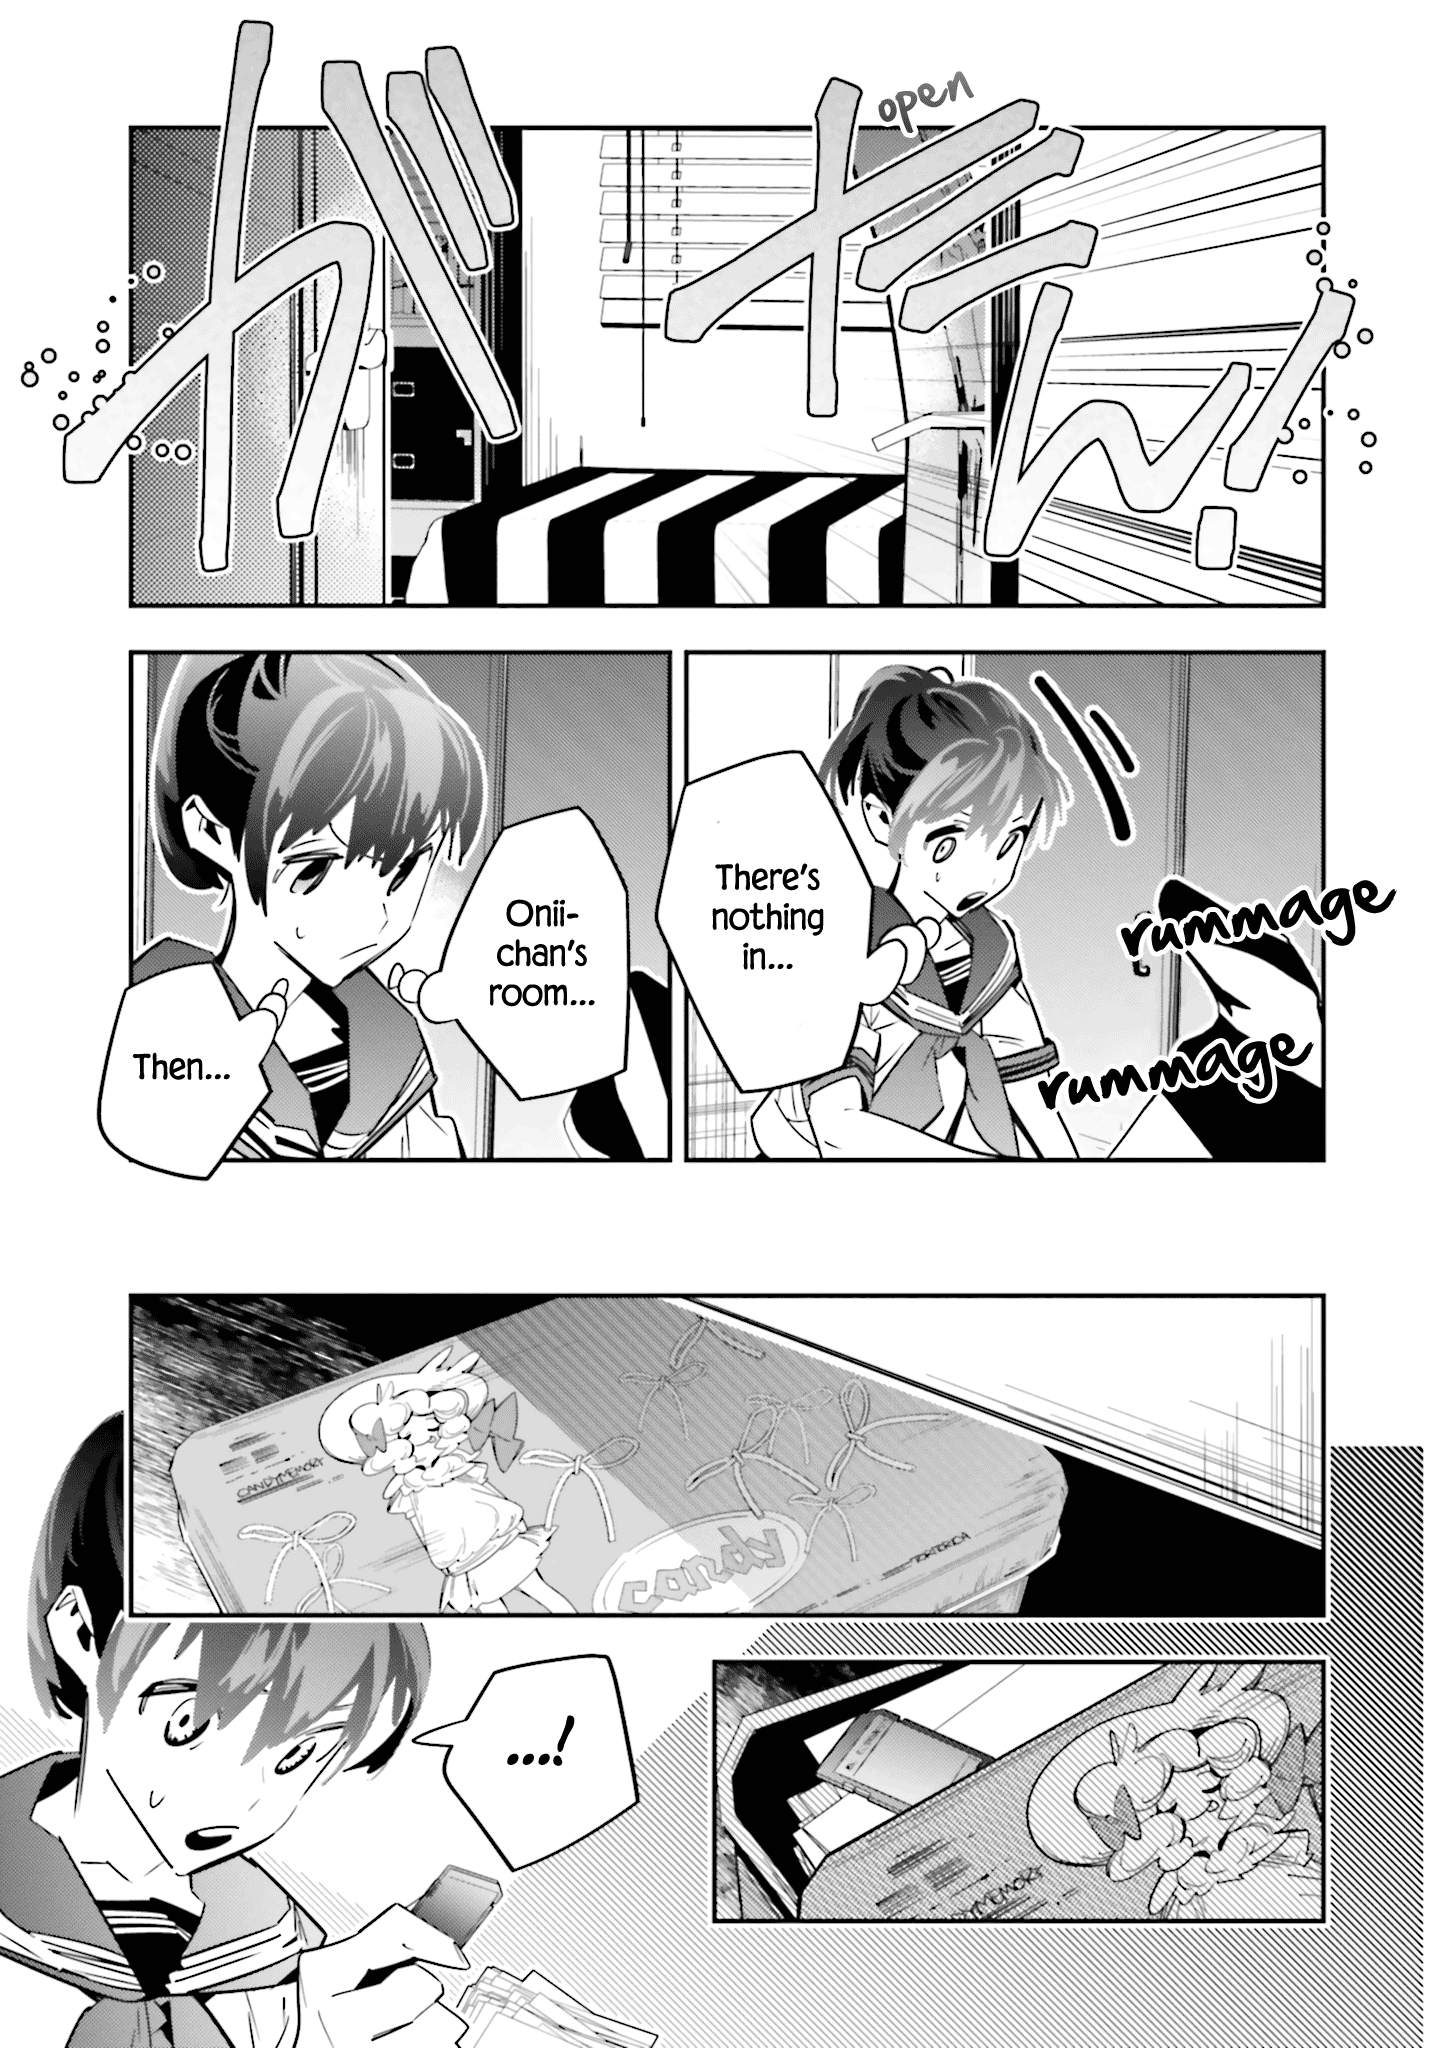 I Reincarnated As The Little Sister Of A Death Game Manga's Murder Mastermind And Failed Chapter 2 #30